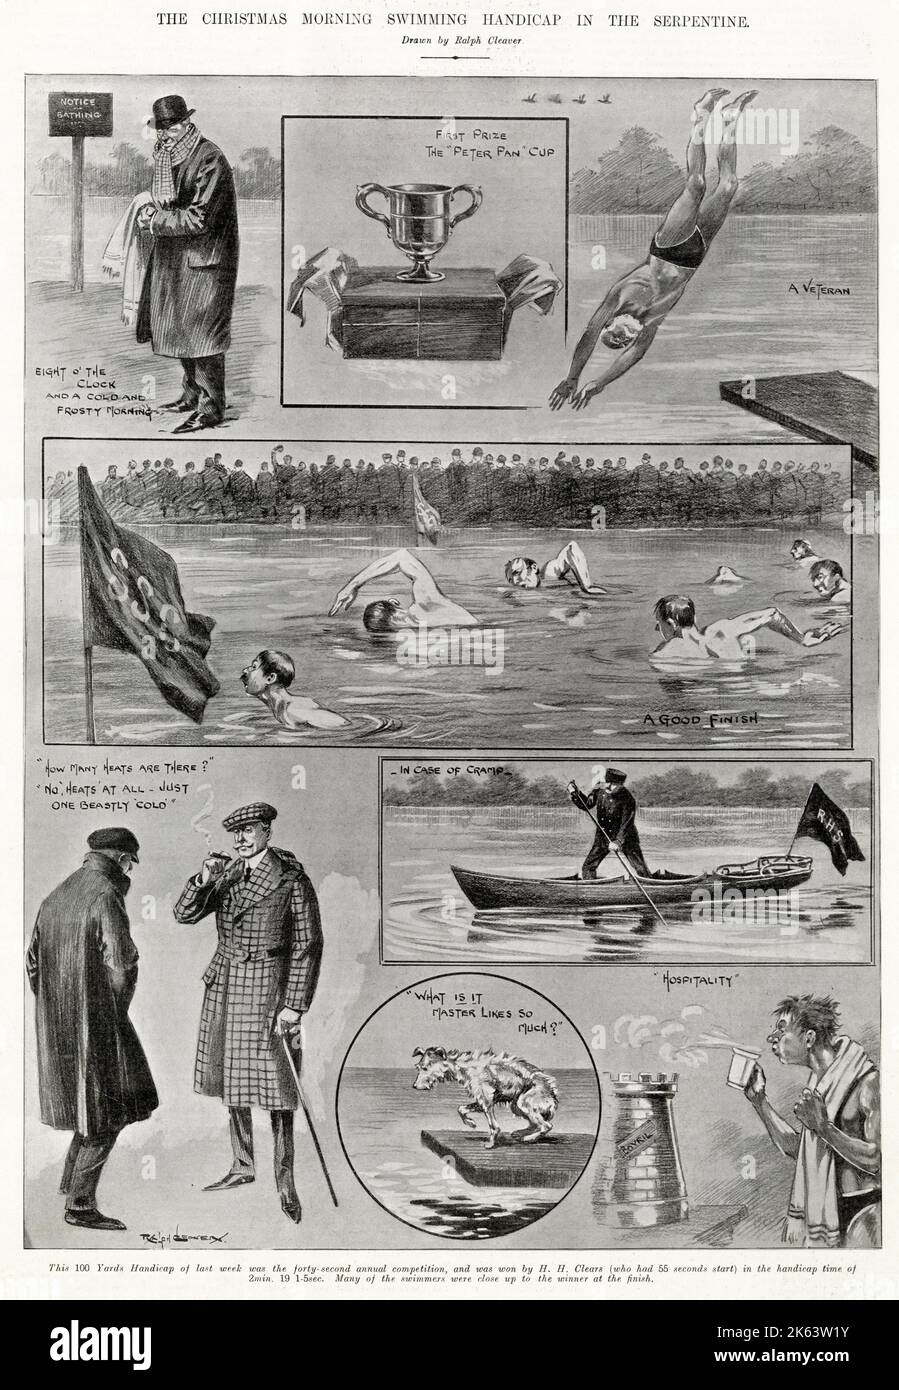 Various scenes of the annual competition at Serpentine lake at Hyde Park, London on Christmas day morning. Stock Photo